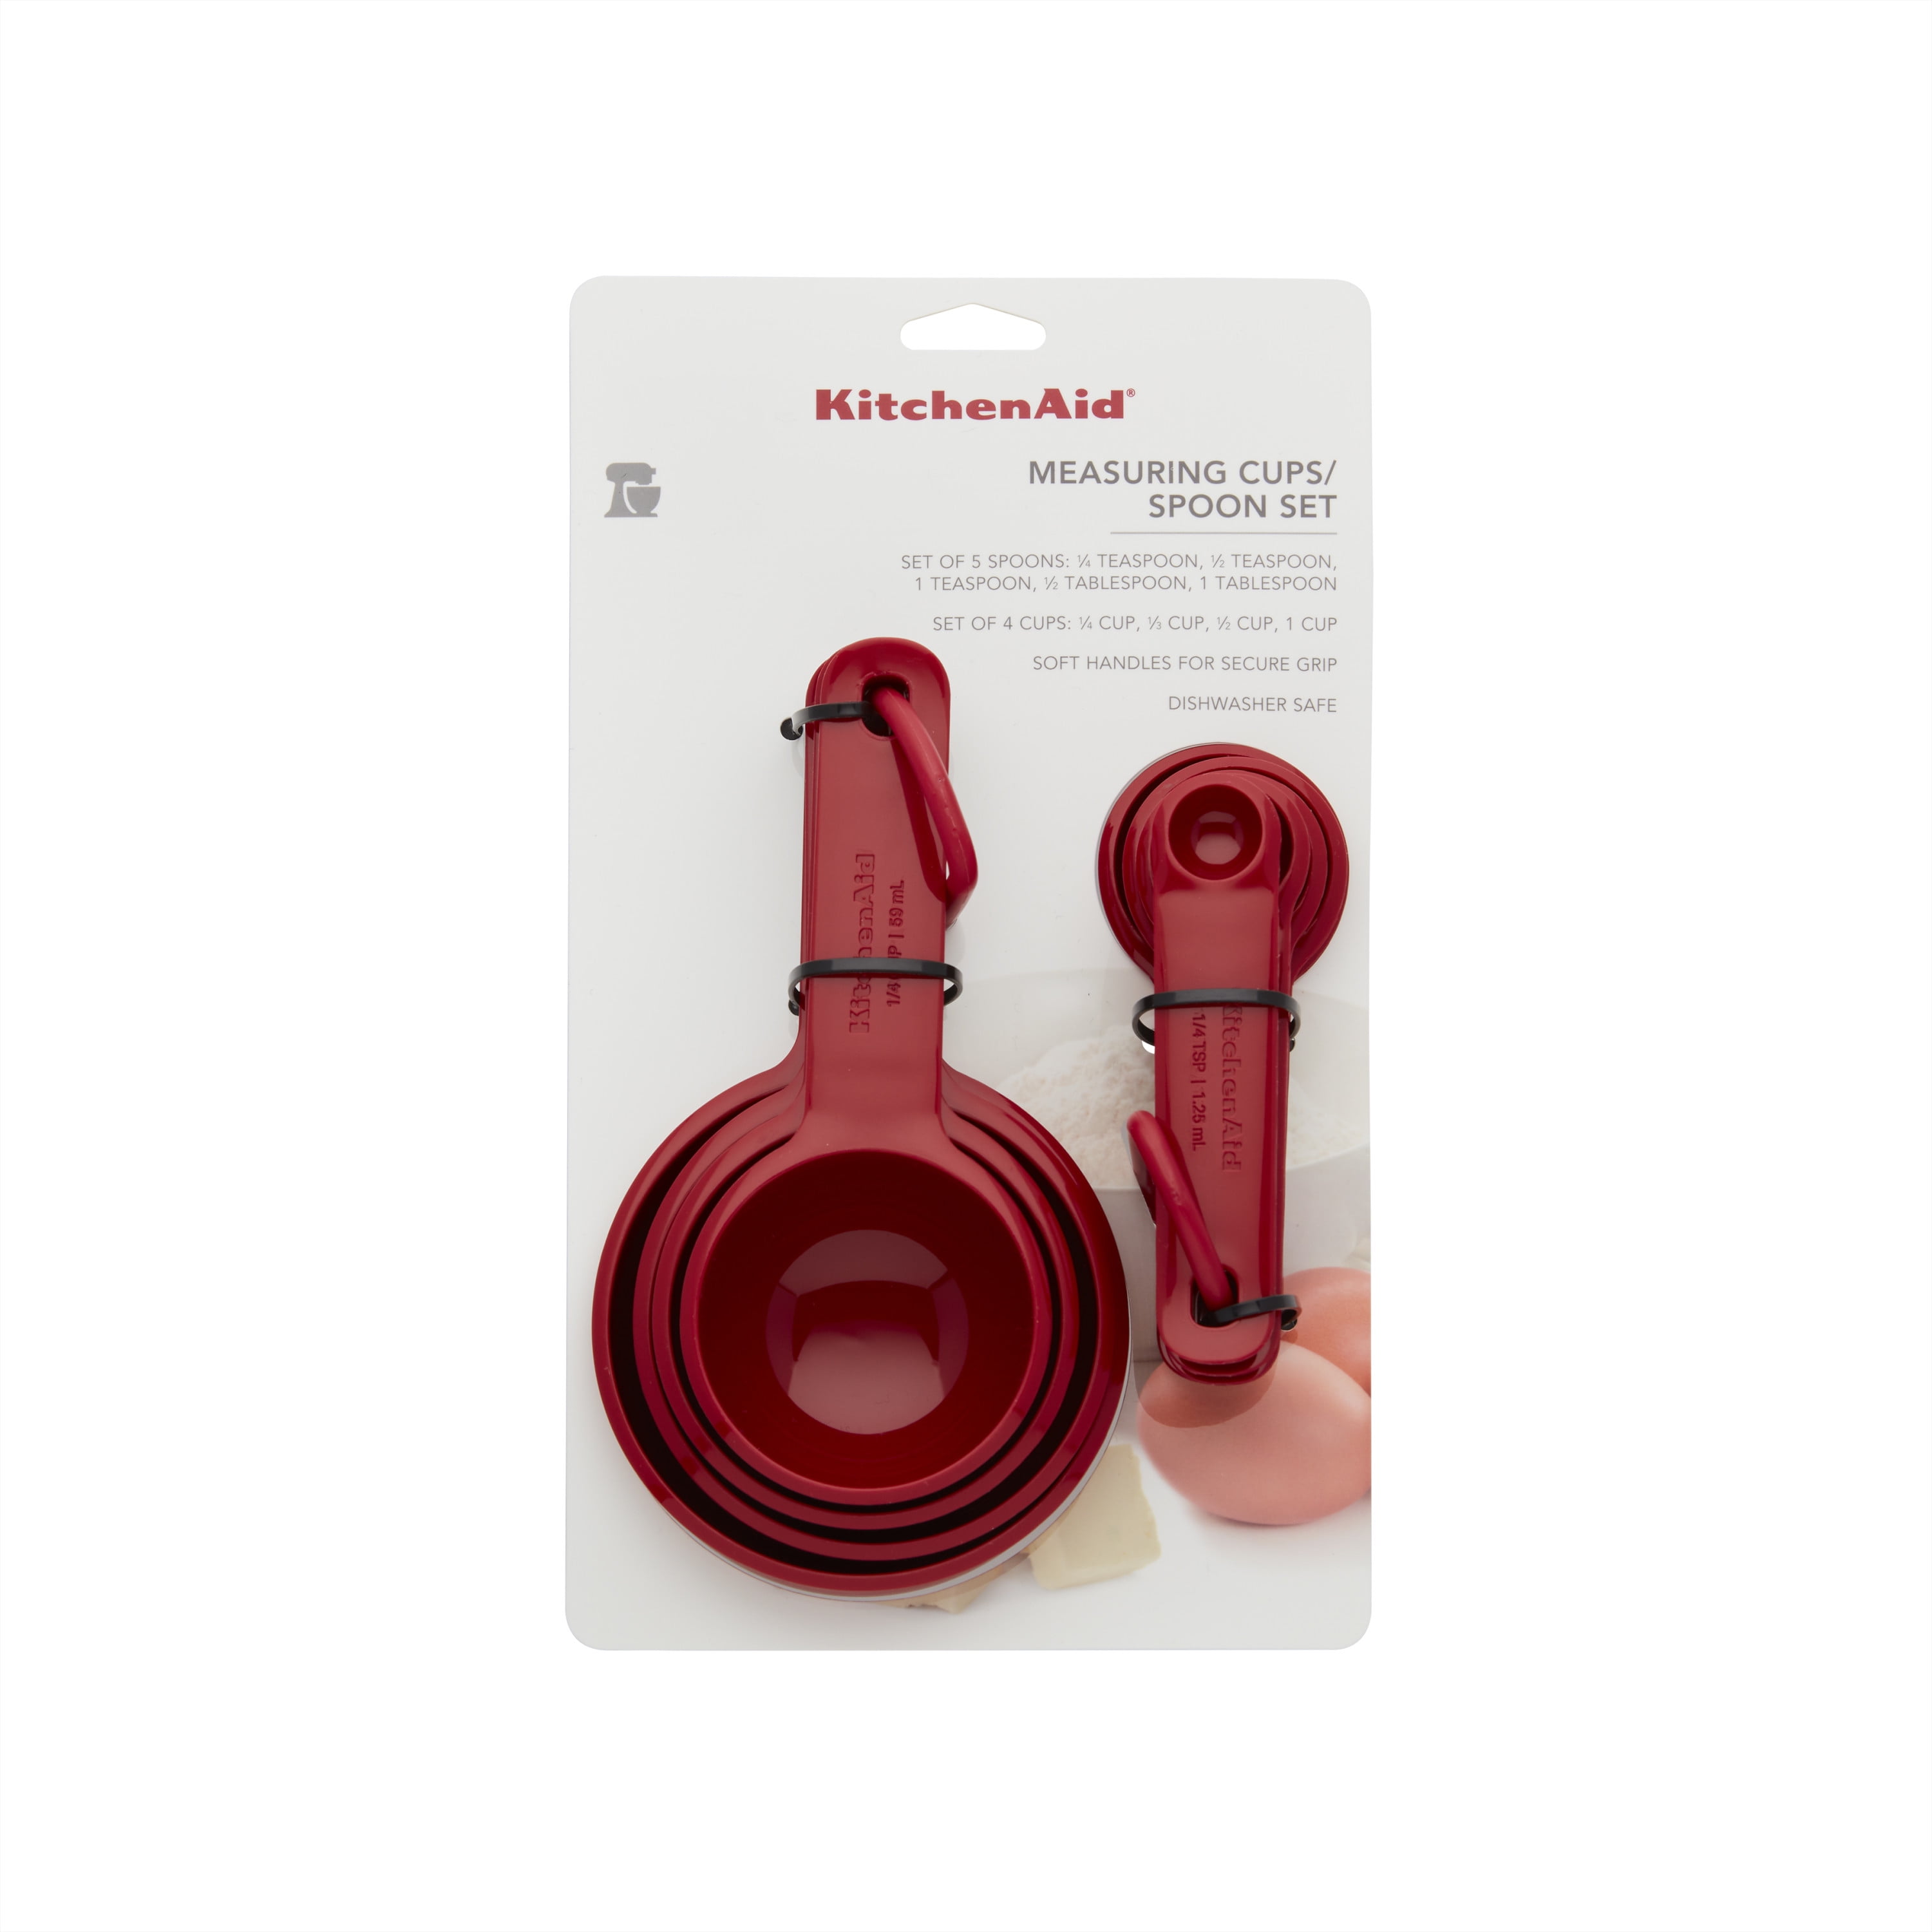 KitchenAid Measuring Cups and Spoons - Red, 9 pc - Kroger